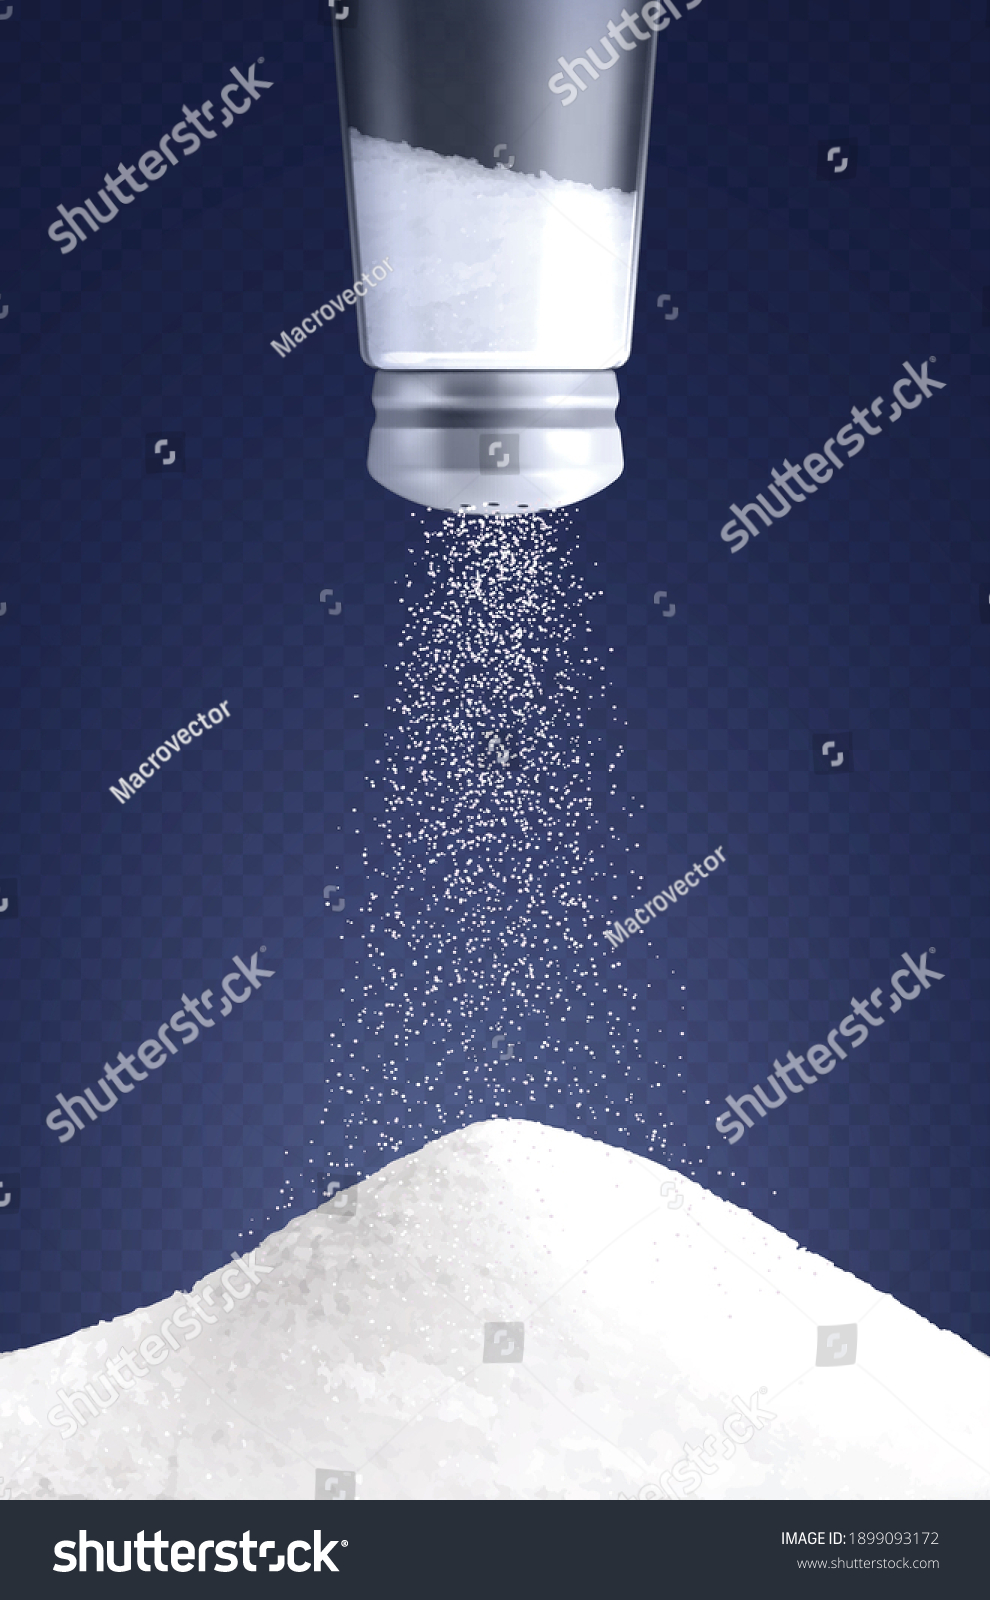 Salt vertical composition with realistic image of salt cellar turned upside down with pouring salt particles vector illustration #1899093172